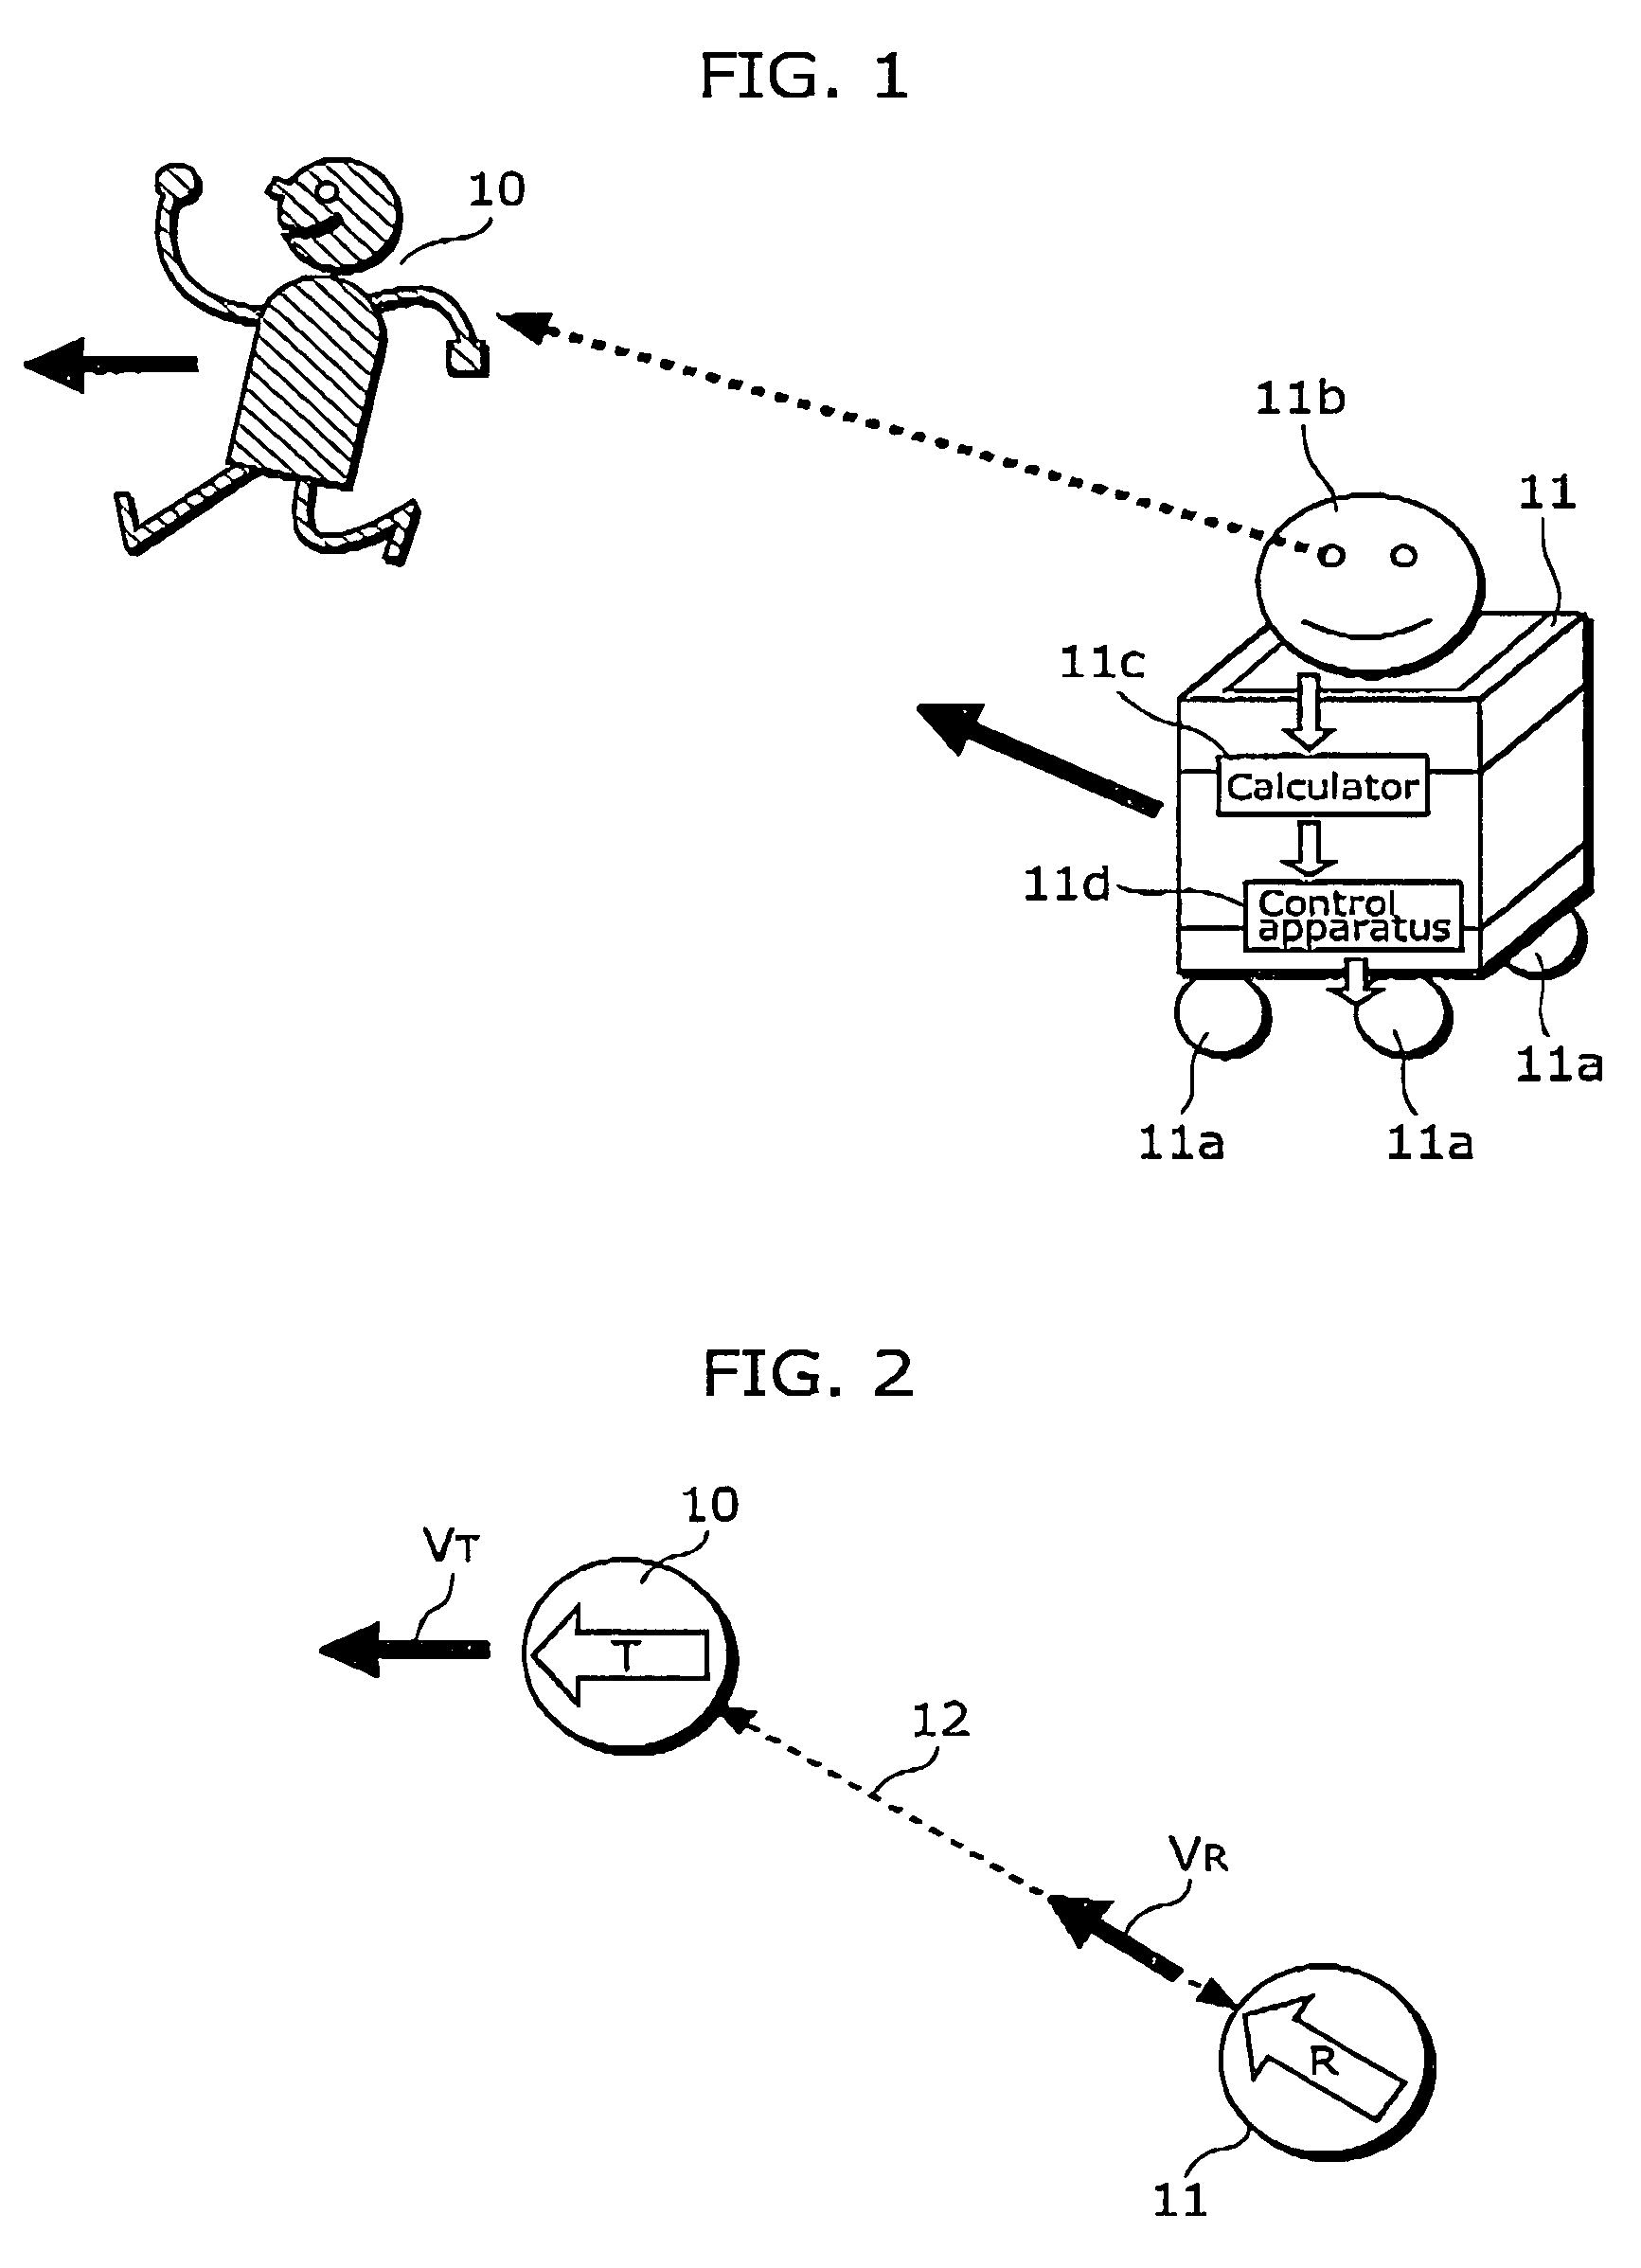 Method of controlling movement of mobile robot